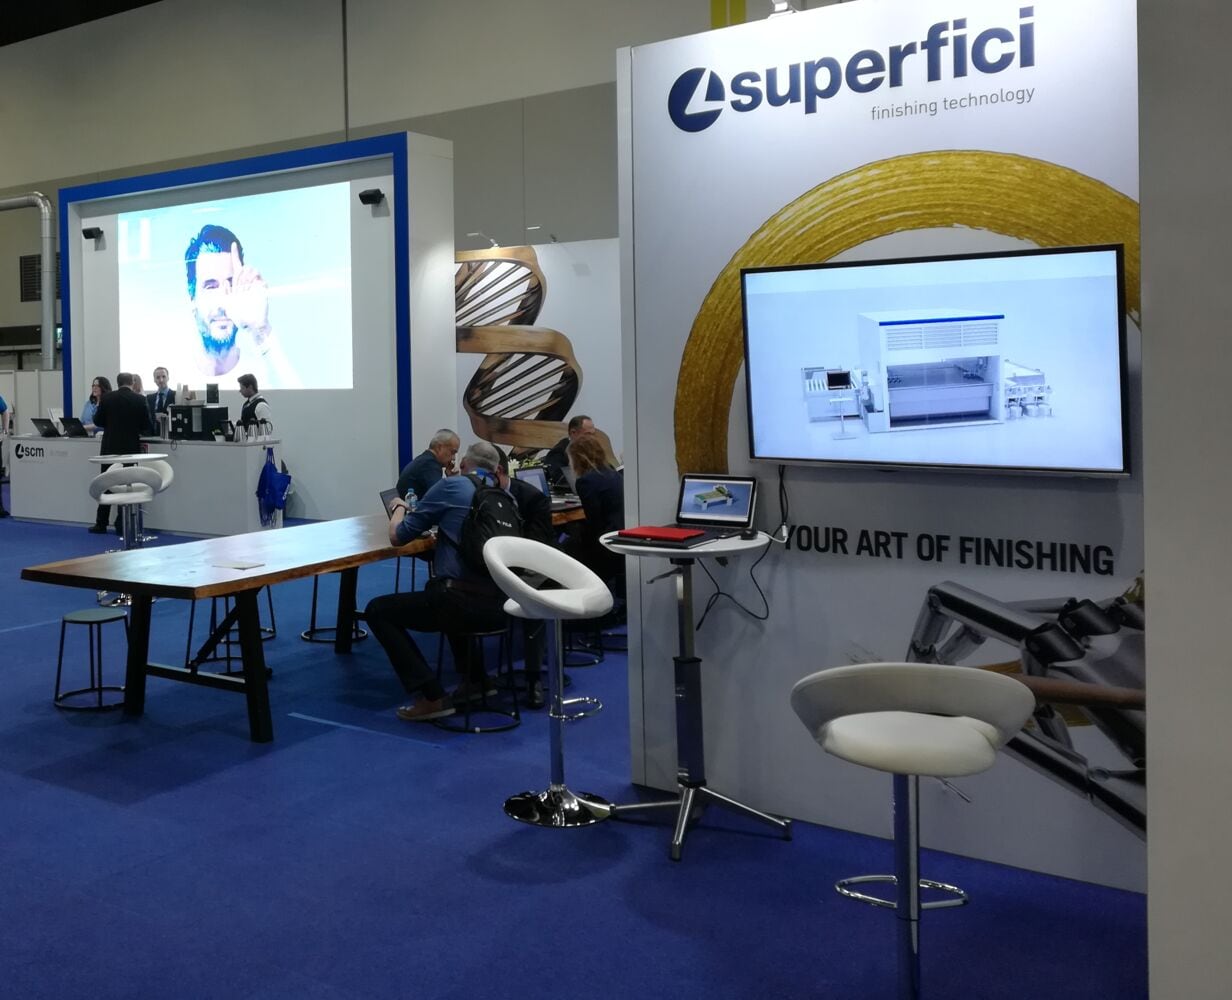 Superfici is in Sydney for the AWISA 2018 fair